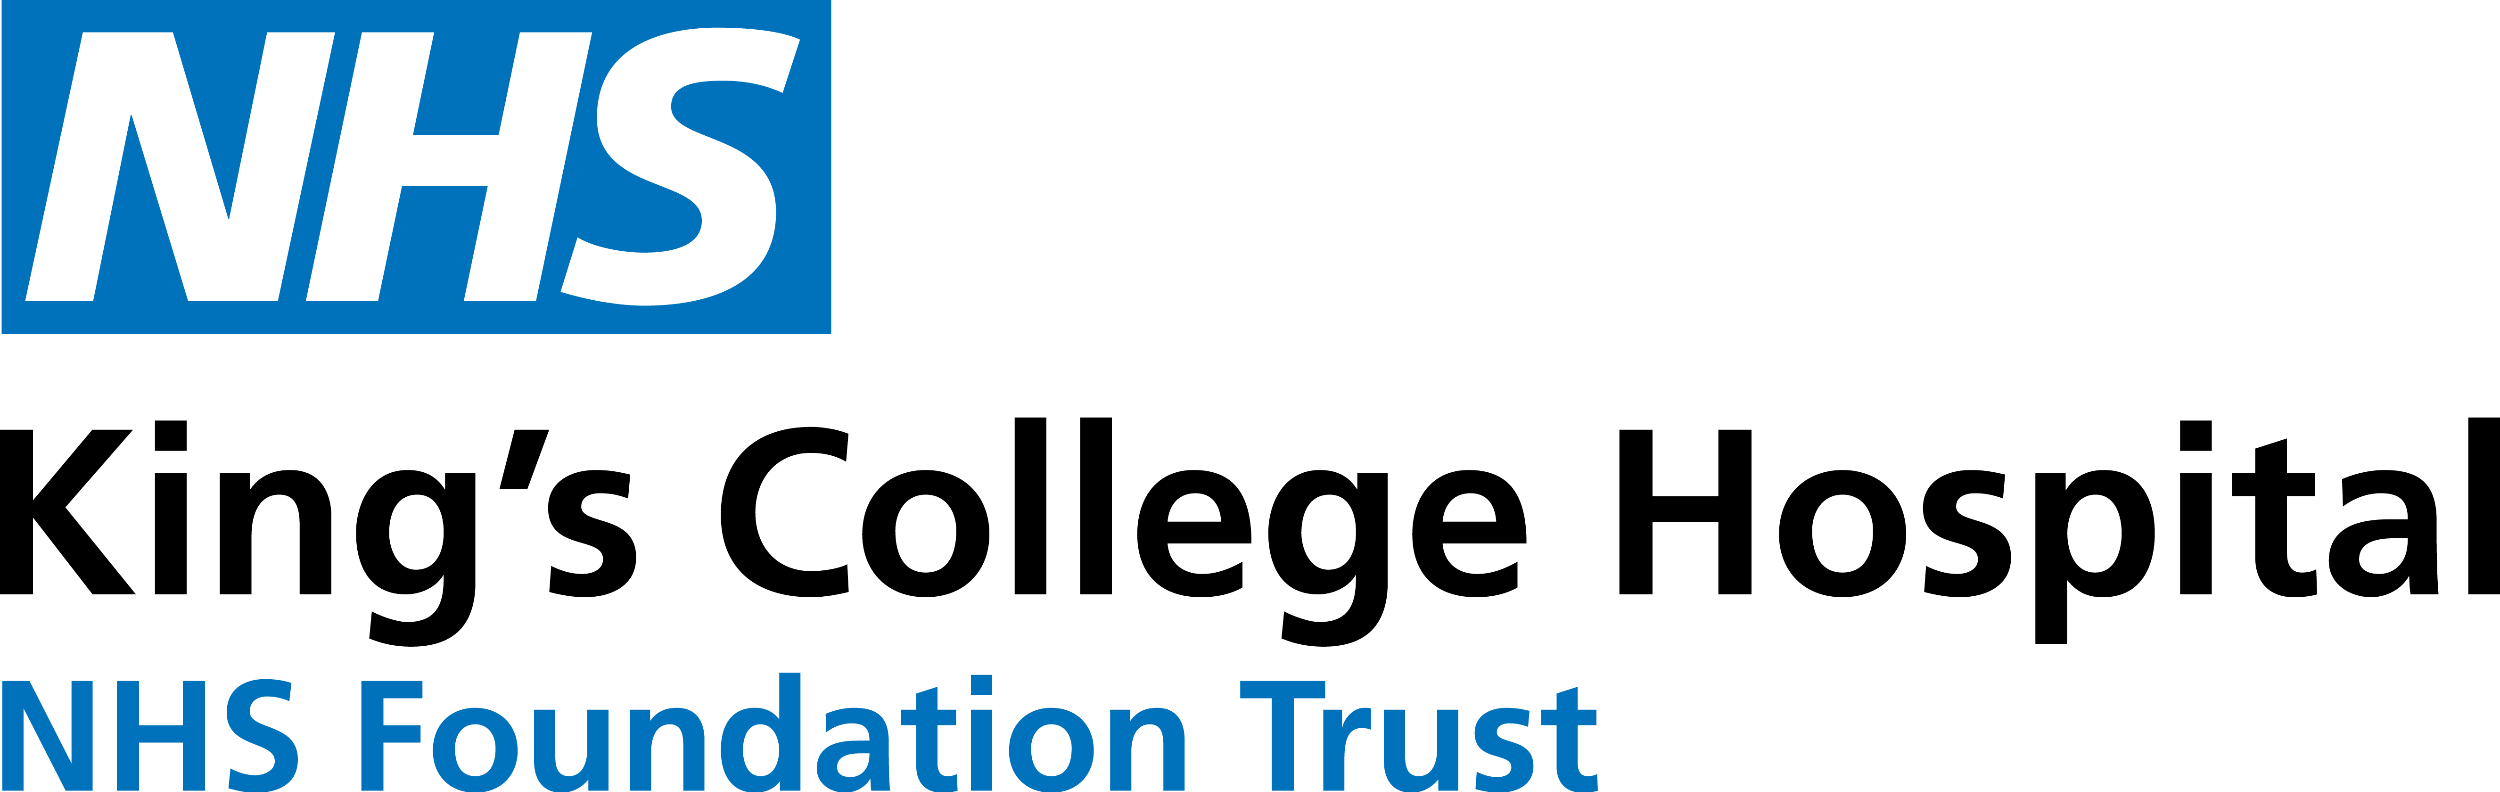 King's College Hospital NHS Foundations Trust logo